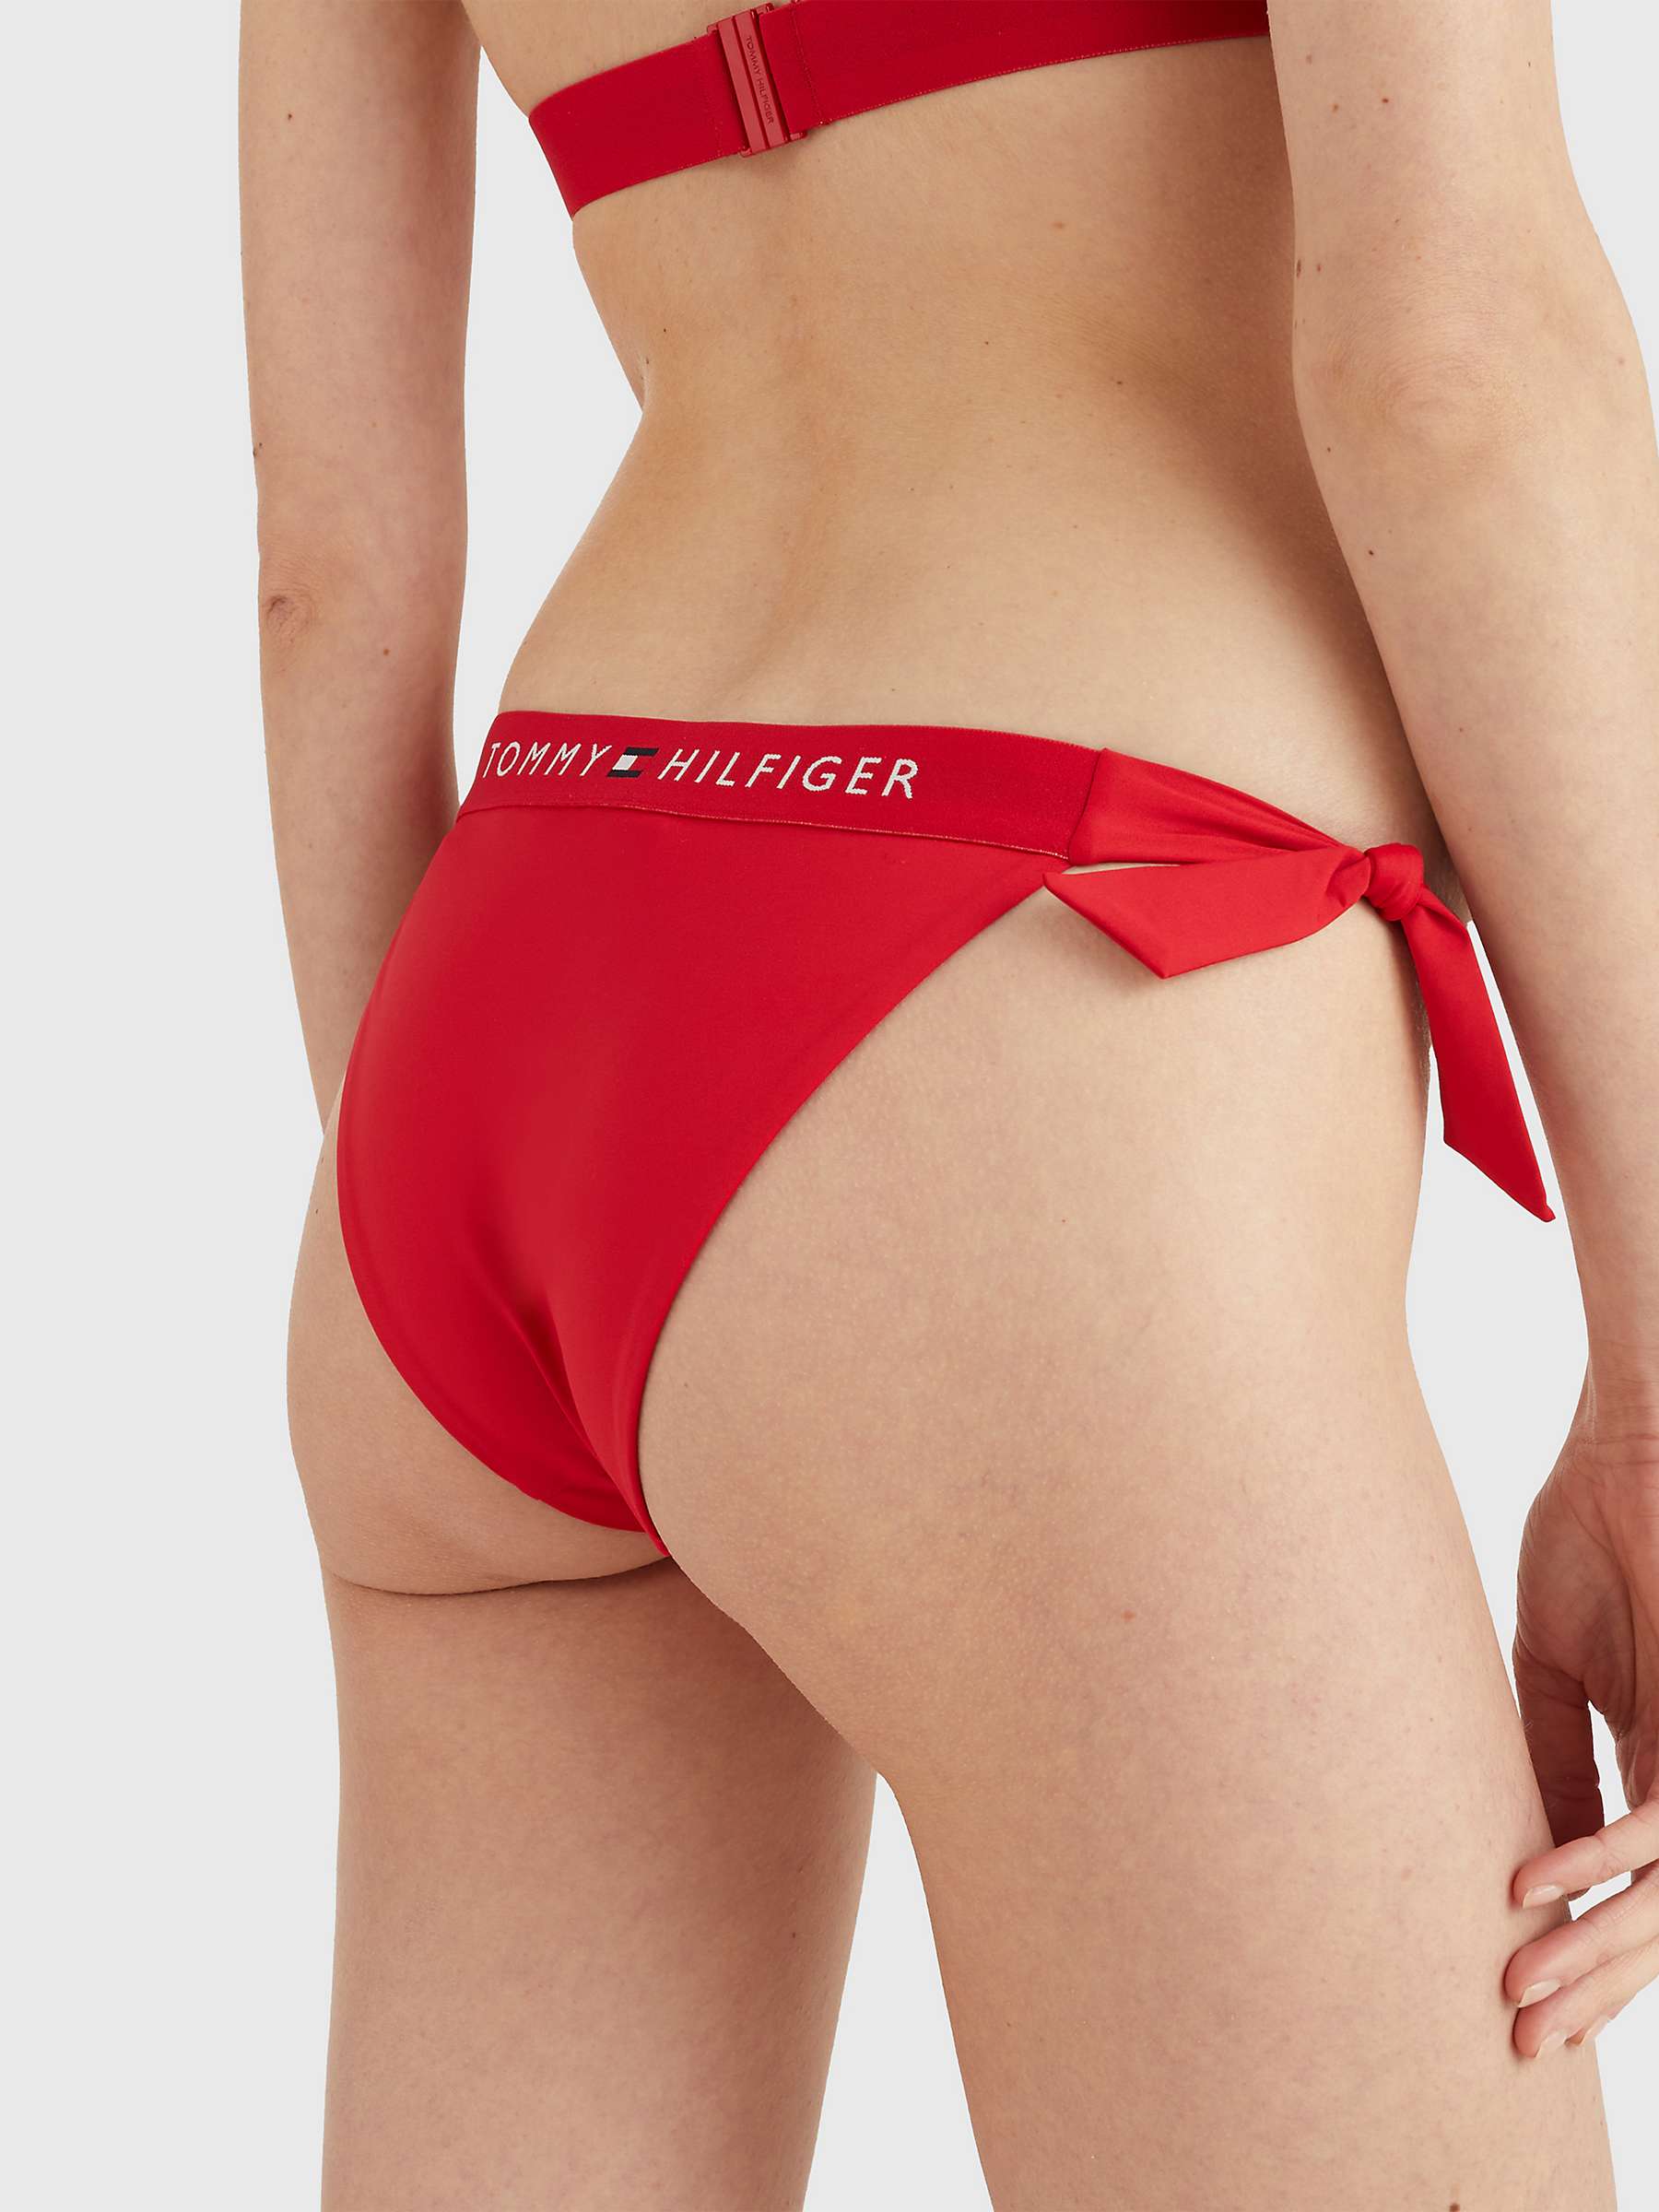 Buy Tommy Hilfiger Cheeky Side Tie Bikini Bottoms, Primary Red Online at johnlewis.com